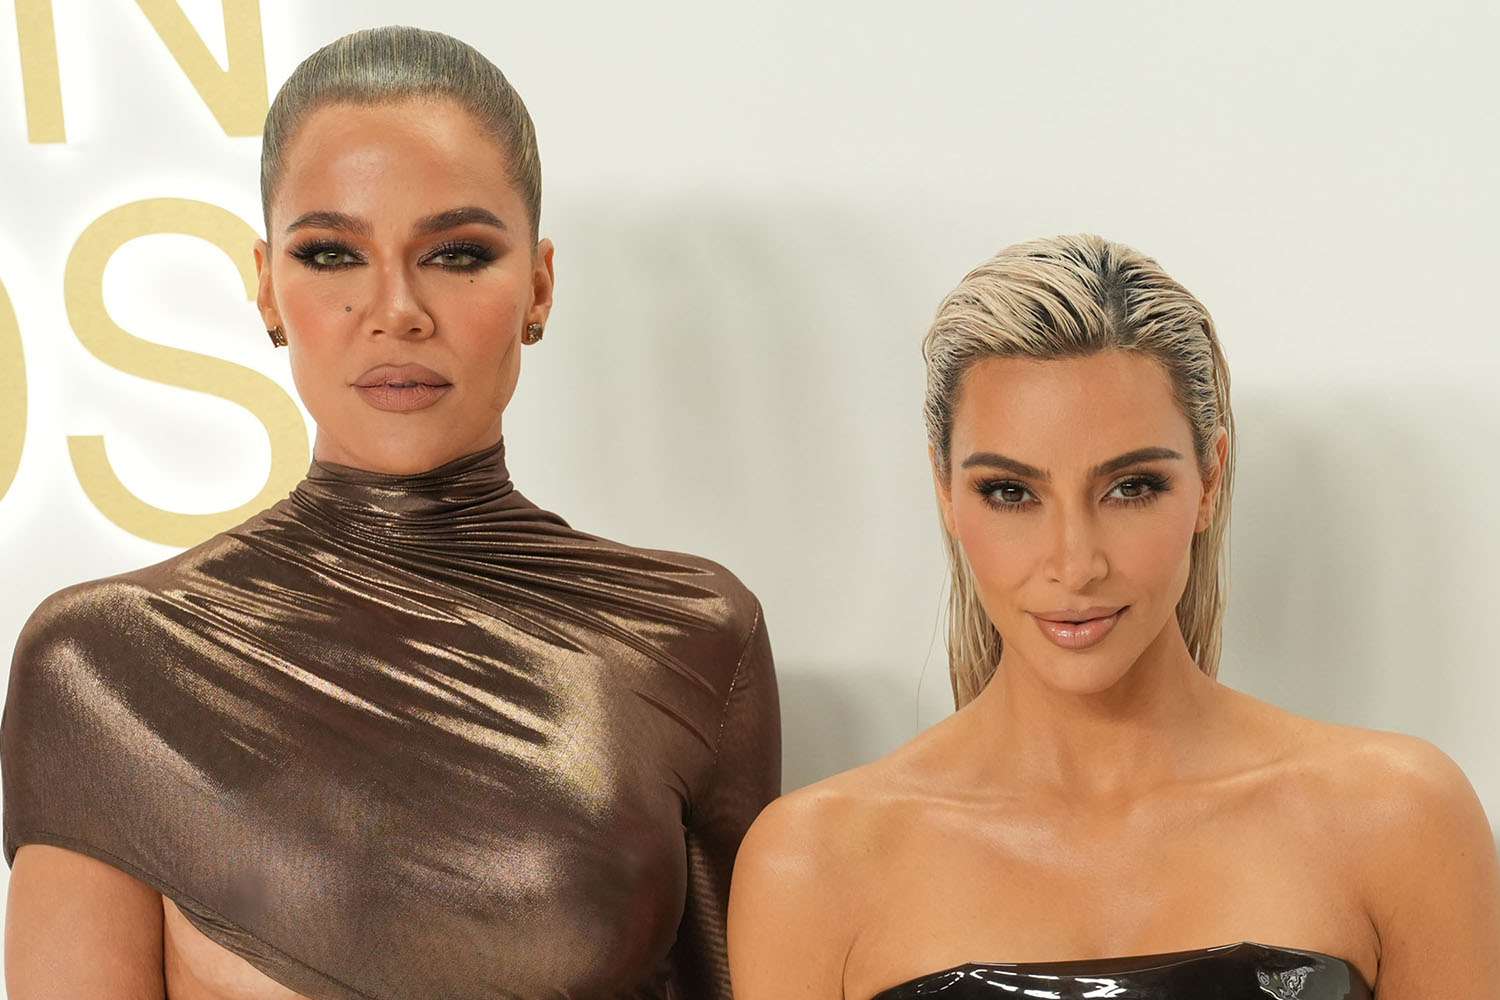 Kim Kardashian Tells Sister Khloé 'Be Careful What You Wish For' After She Reposts “KUWTK” Bag Swing Scene